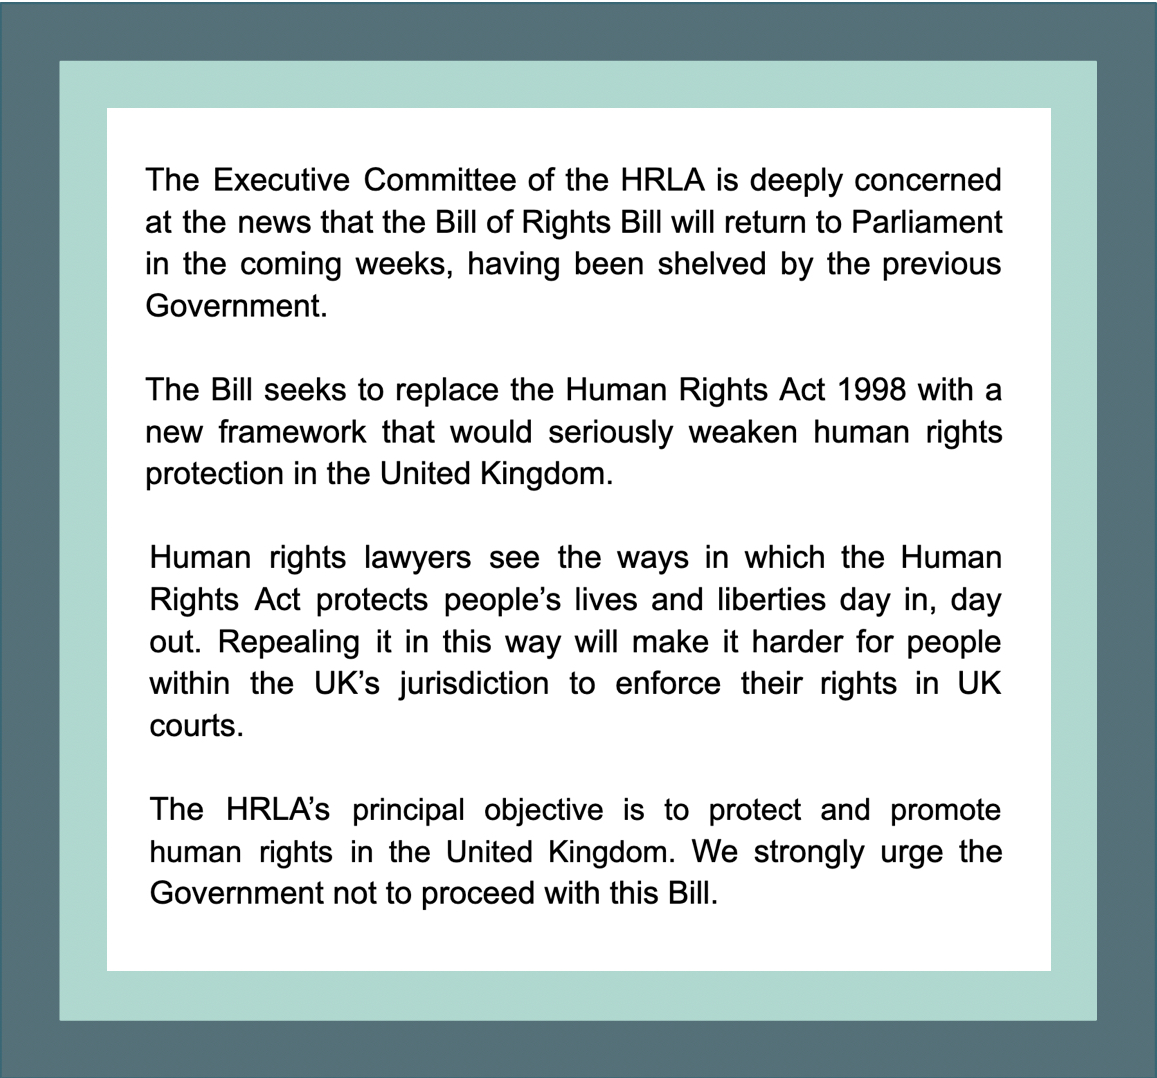 The #HumanRightsAct was signed into law 24 years ago this week. The HRLA are deeply concerned that it is once again under threat. Please see the following statement: